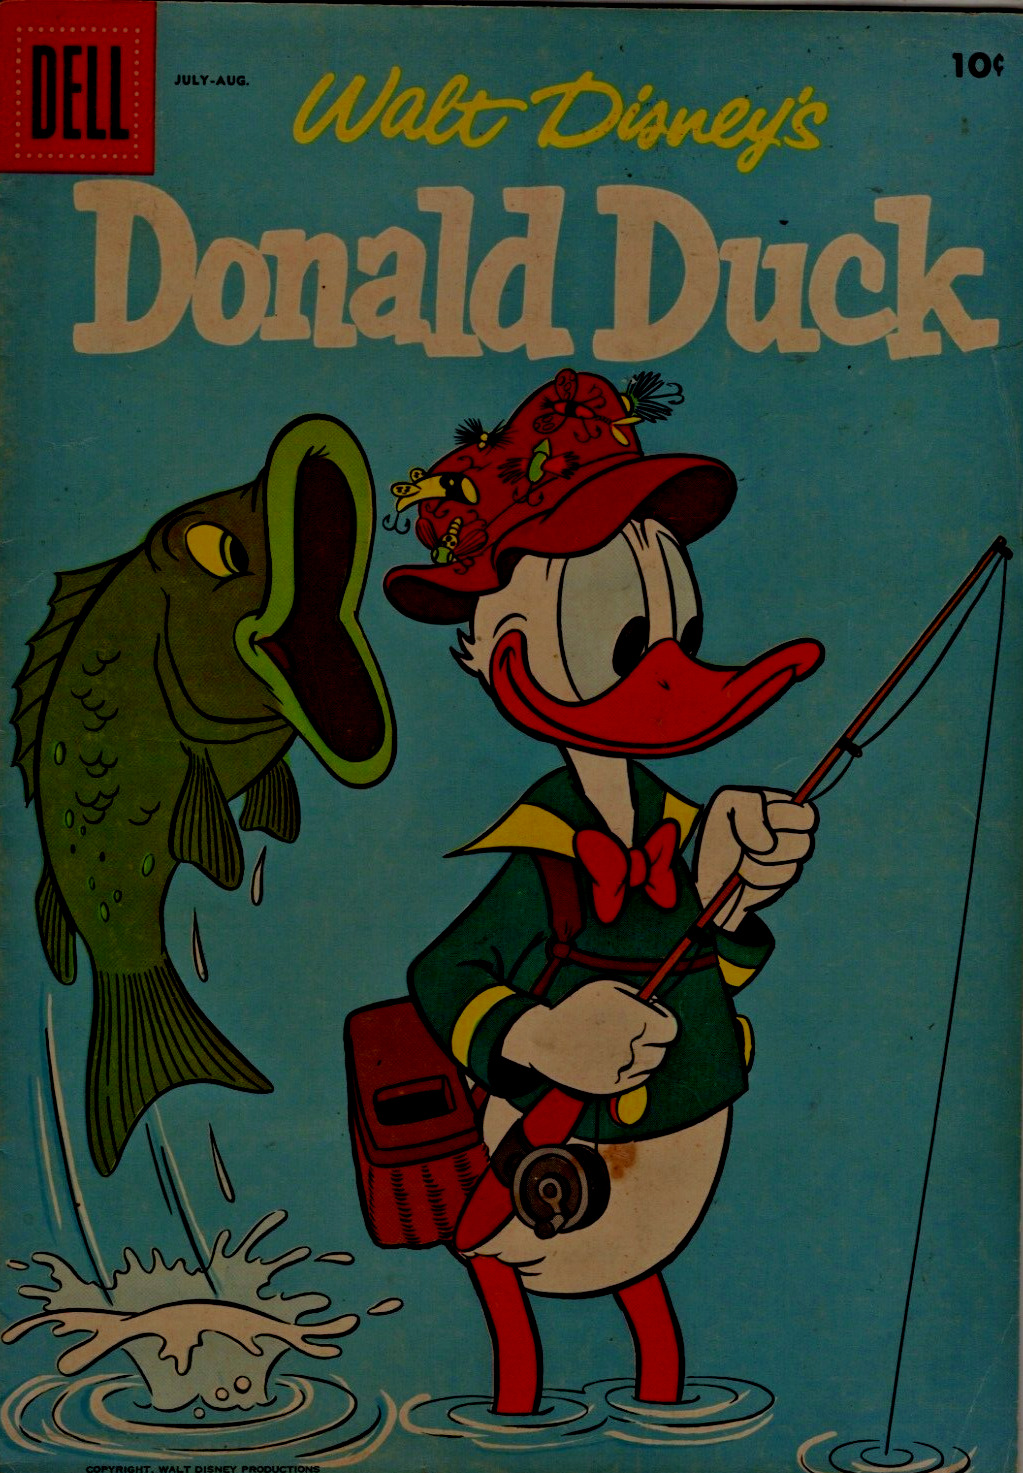 1957 DONALD DUCK #54 with FISHING COVER and fabulous CARL BARKS STORY